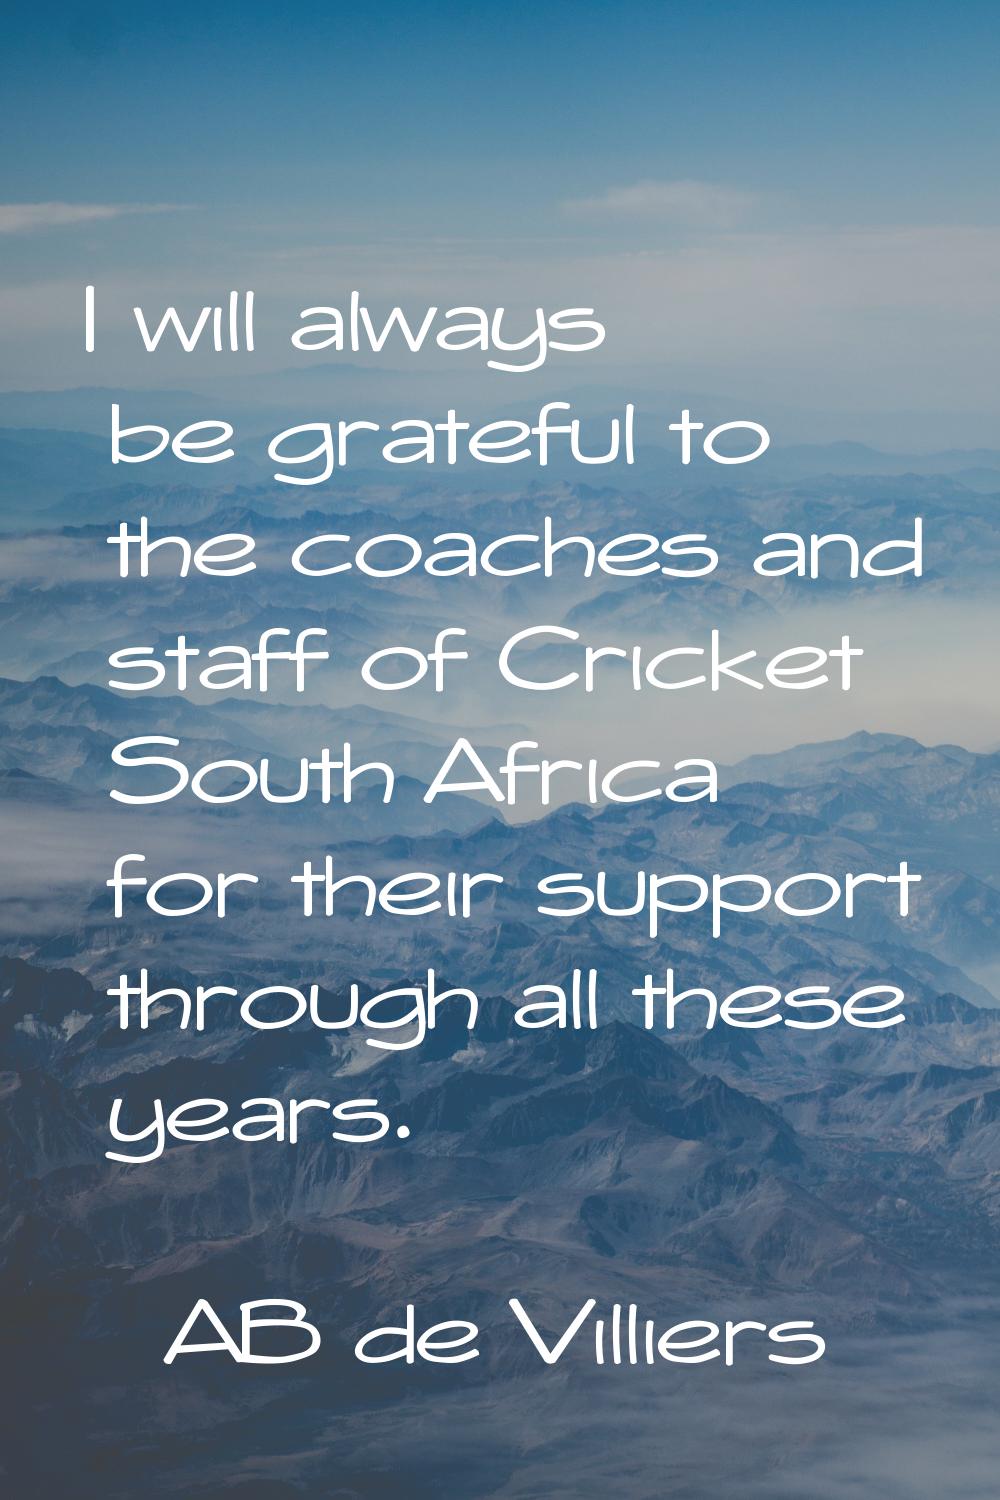 I will always be grateful to the coaches and staff of Cricket South Africa for their support throug